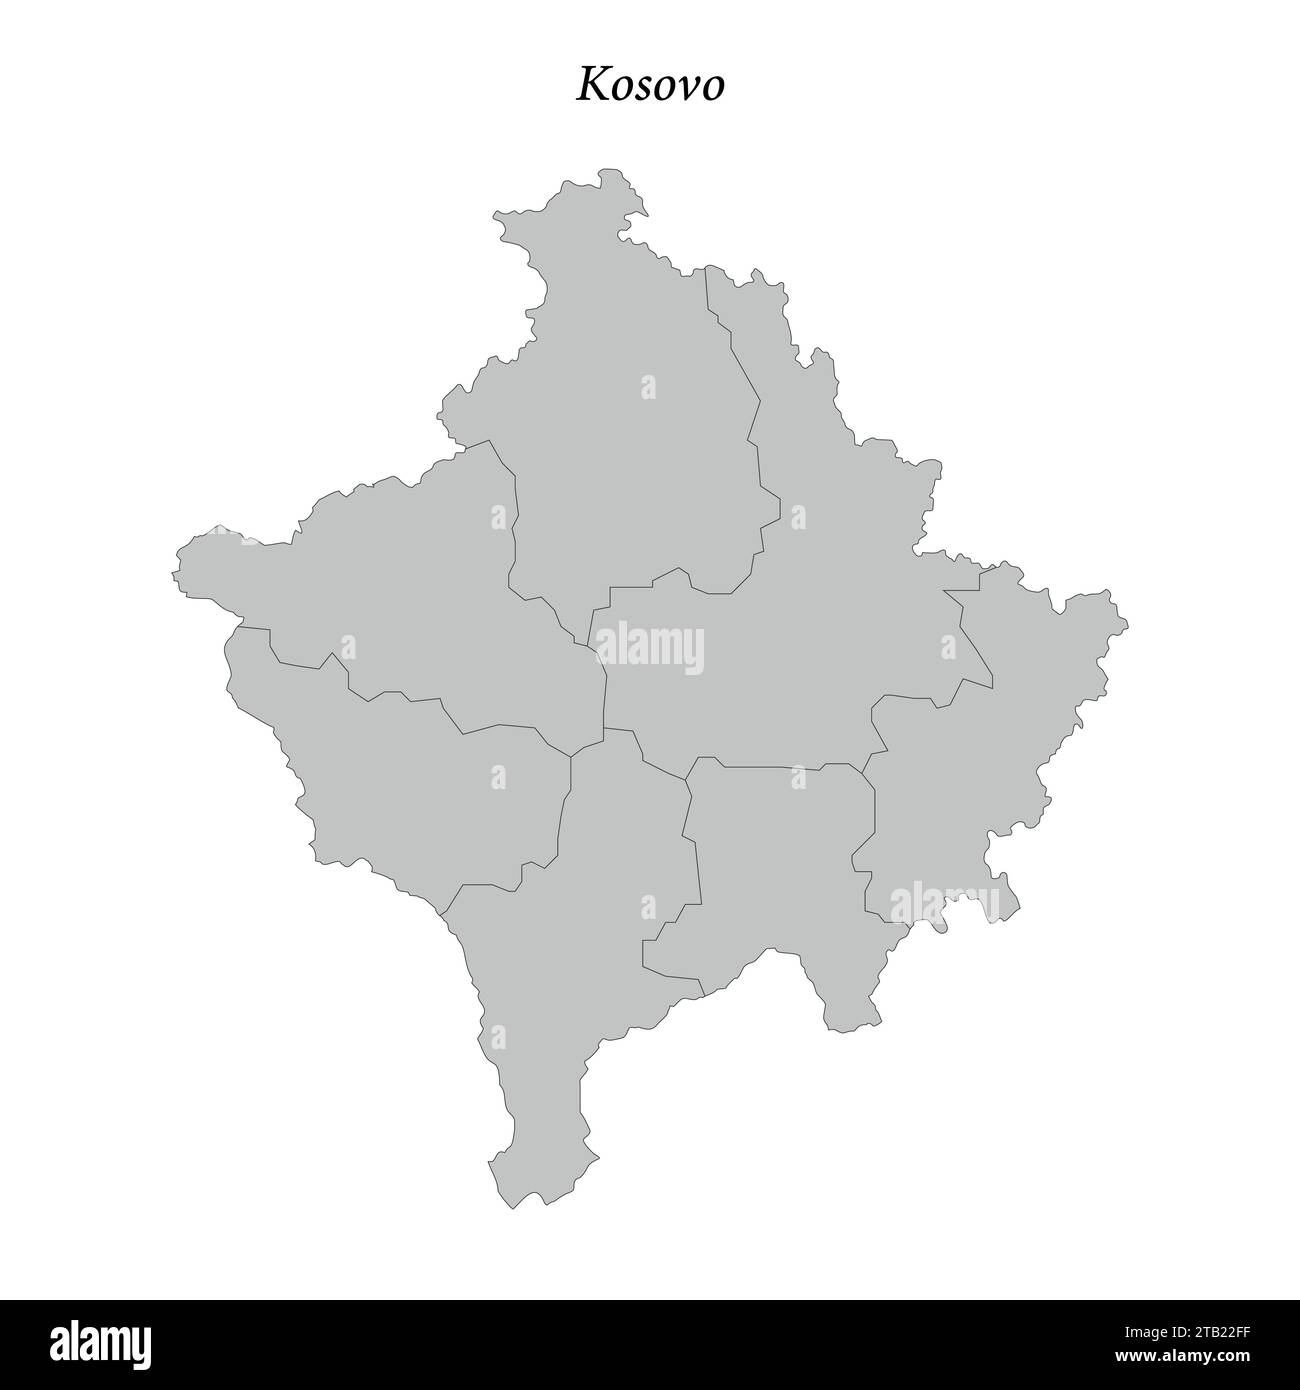 Simple flat Map of Kosovo with district borders Stock Vector